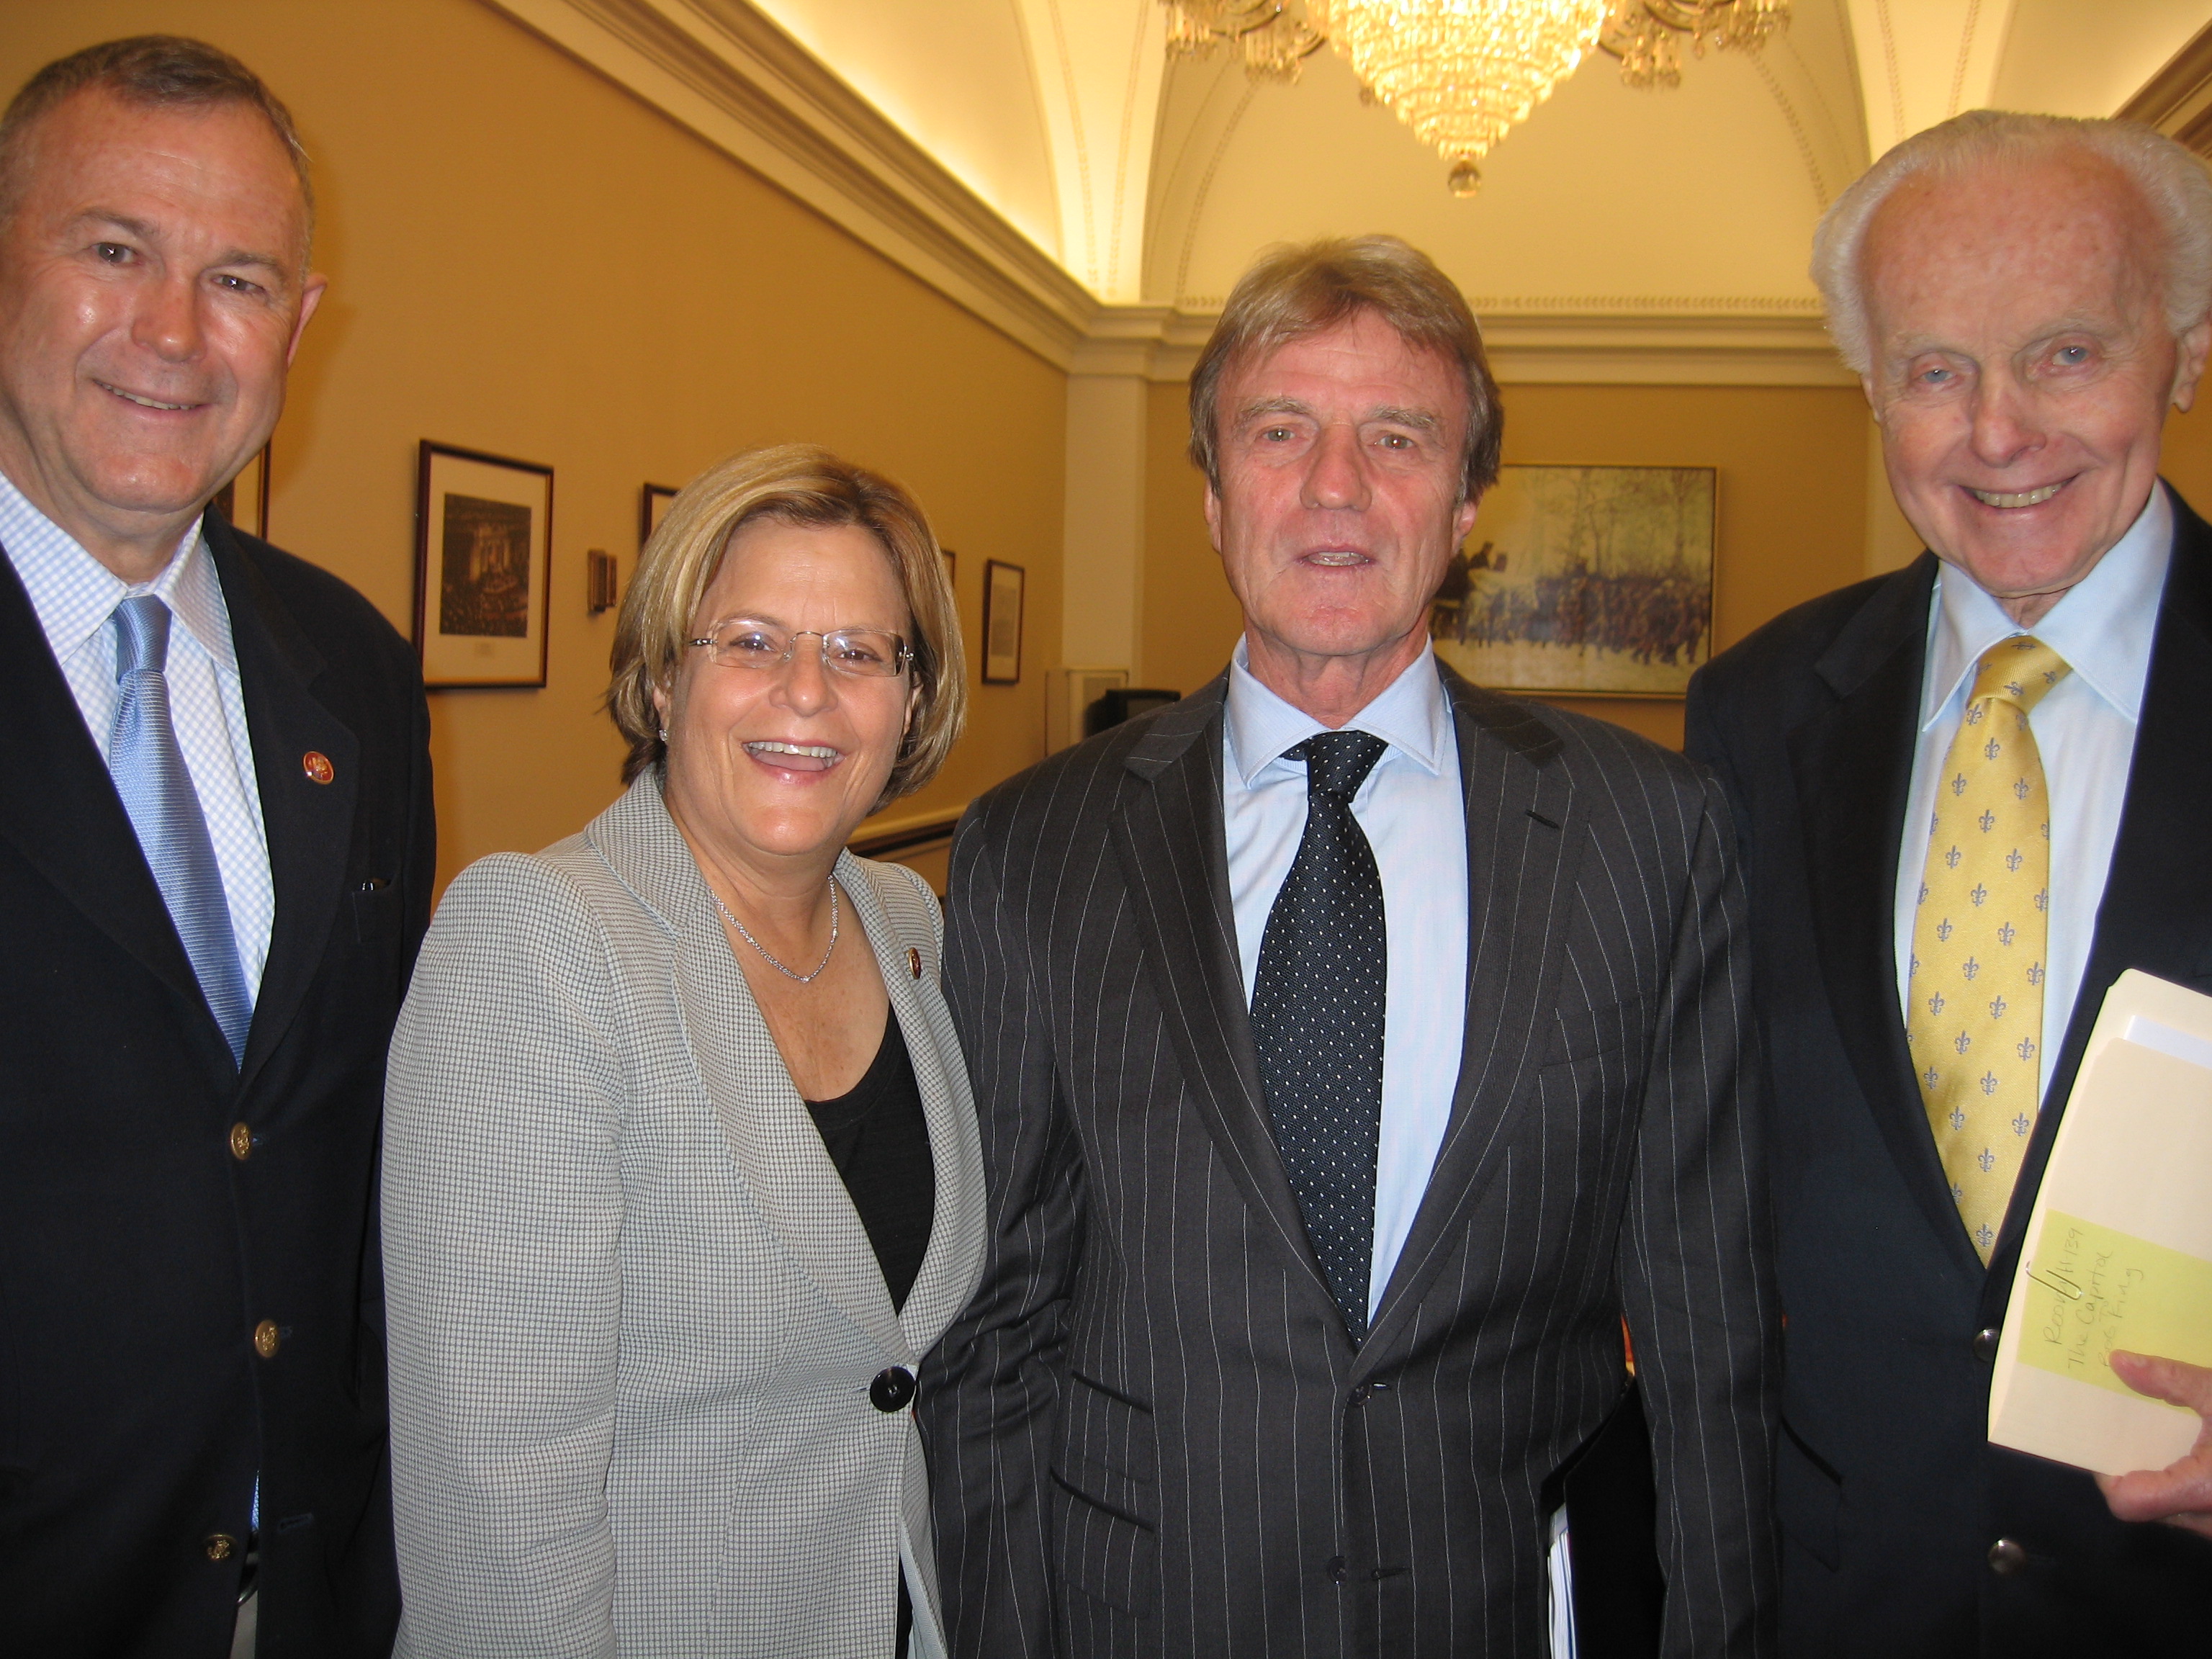 Ranking Member Ros-Lehtinen, Chairman Tom Lantos and Rep. Dana Rohrabacher stand with French Foreign Minister Bernard Kouchner following a meeting in the U.S. Capitol Building